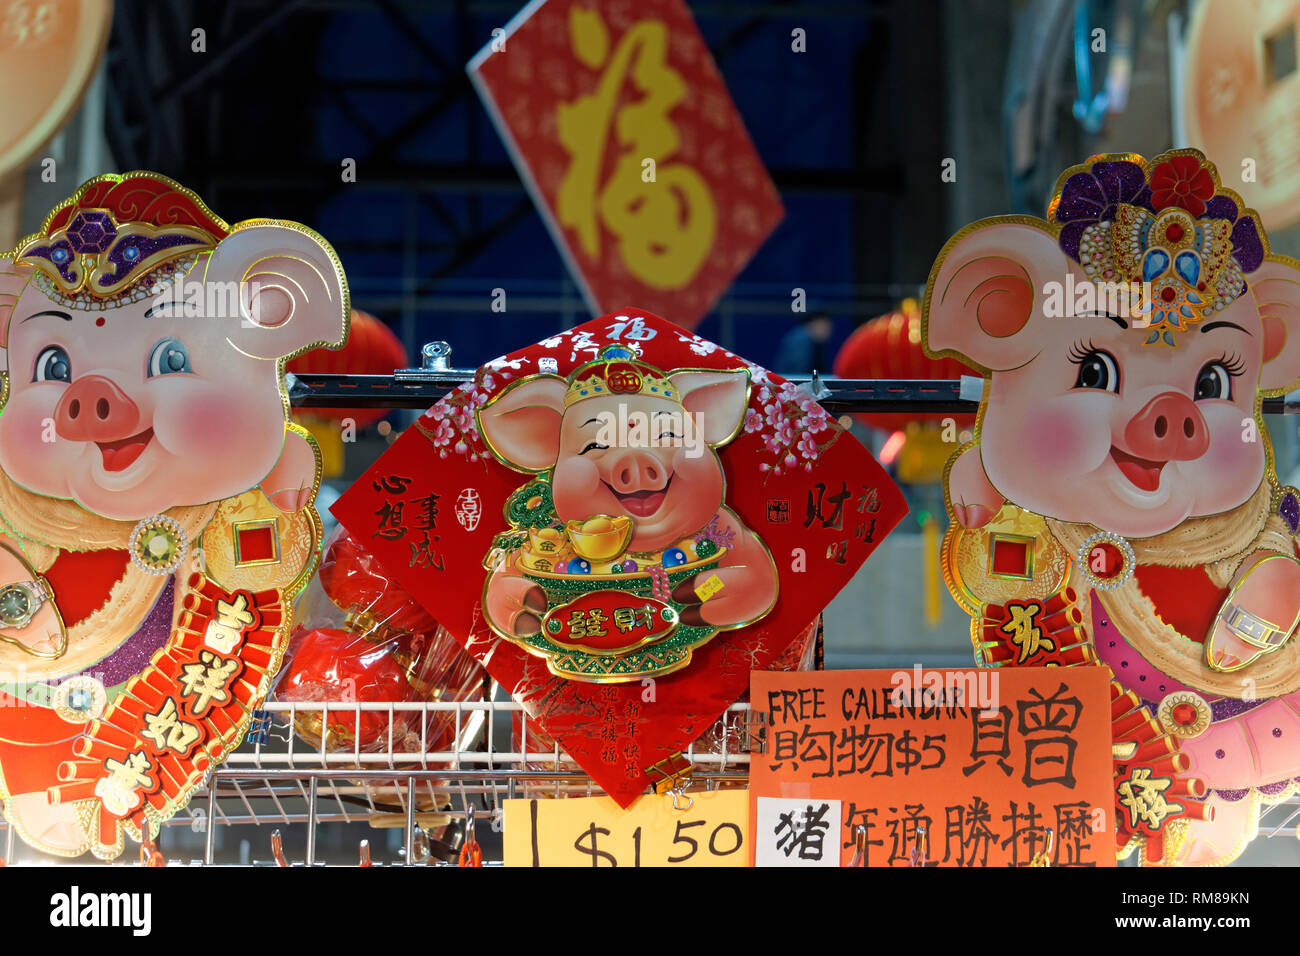 Year of the Pig 2019 decorations, Chinese New Year celebrations at International Village Mall, Chinatown, Vancouver,  BC, Canada Stock Photo